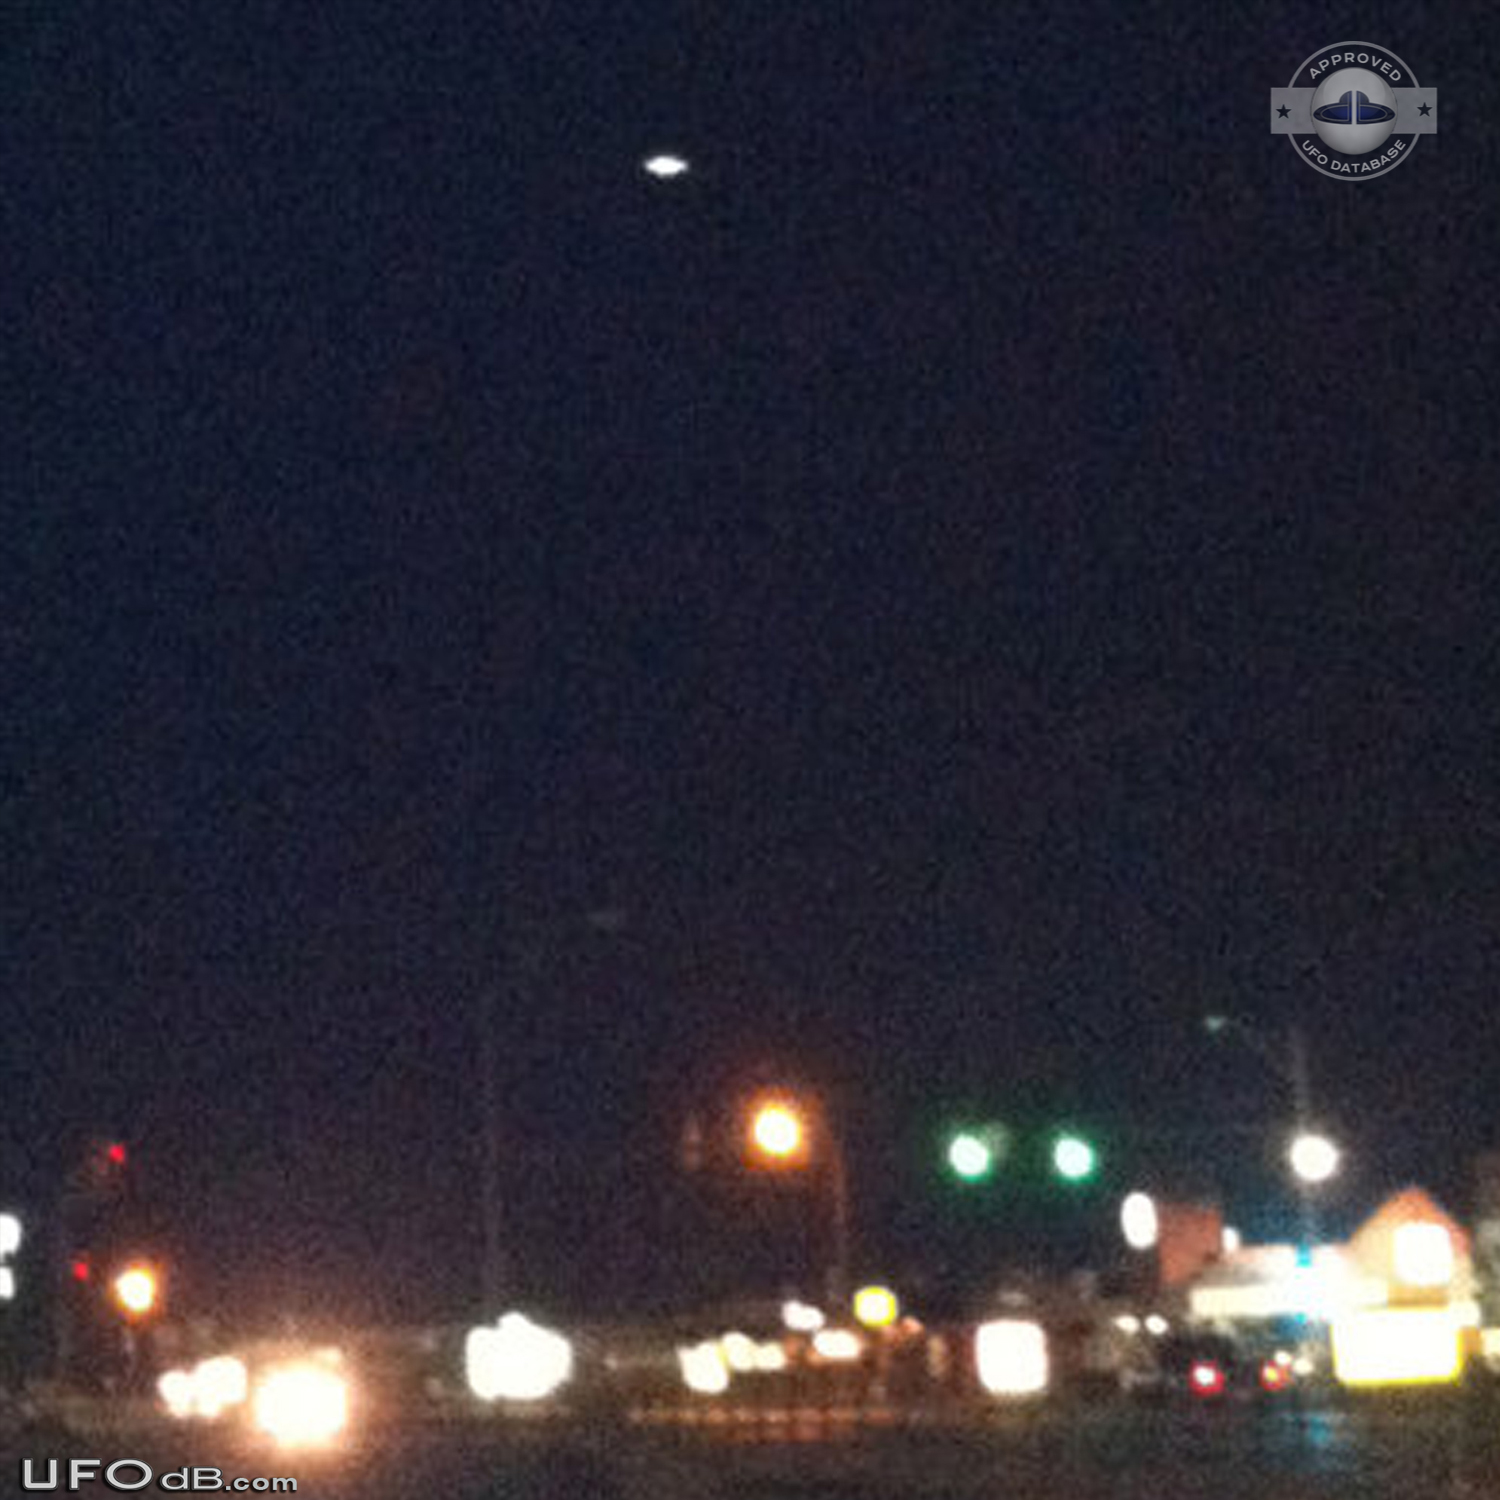 Saucer UFO picture seen over Euless Texas sent to TV station - 2013 UFO Picture #542-1